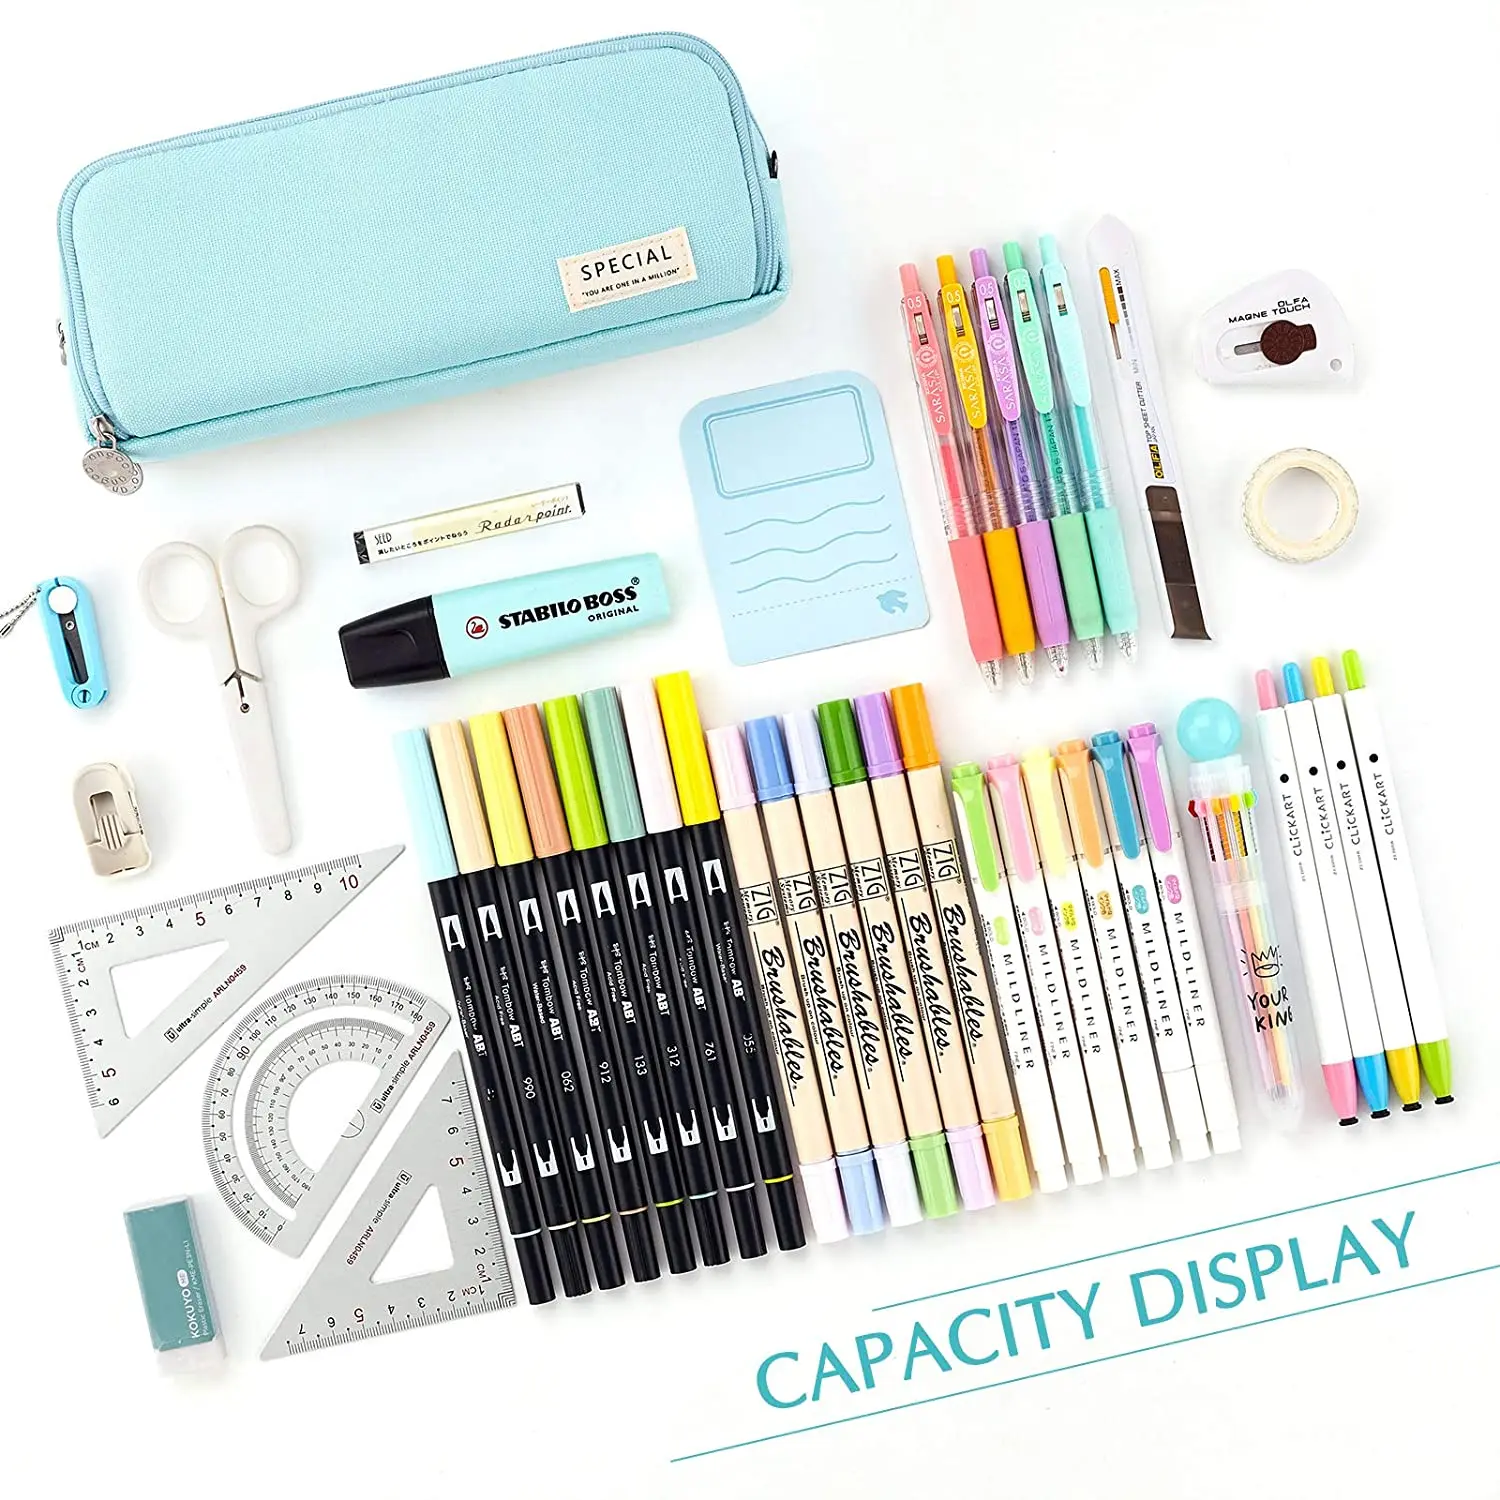 https://ae01.alicdn.com/kf/Sa01572d0e88b4b3cb37417f4bbc11abax/Large-Pencil-Case-Big-Capacity-3-Compartments-Canvas-Pencil-Pouch-for-Teen-Boys-Girls-School-Students.jpg